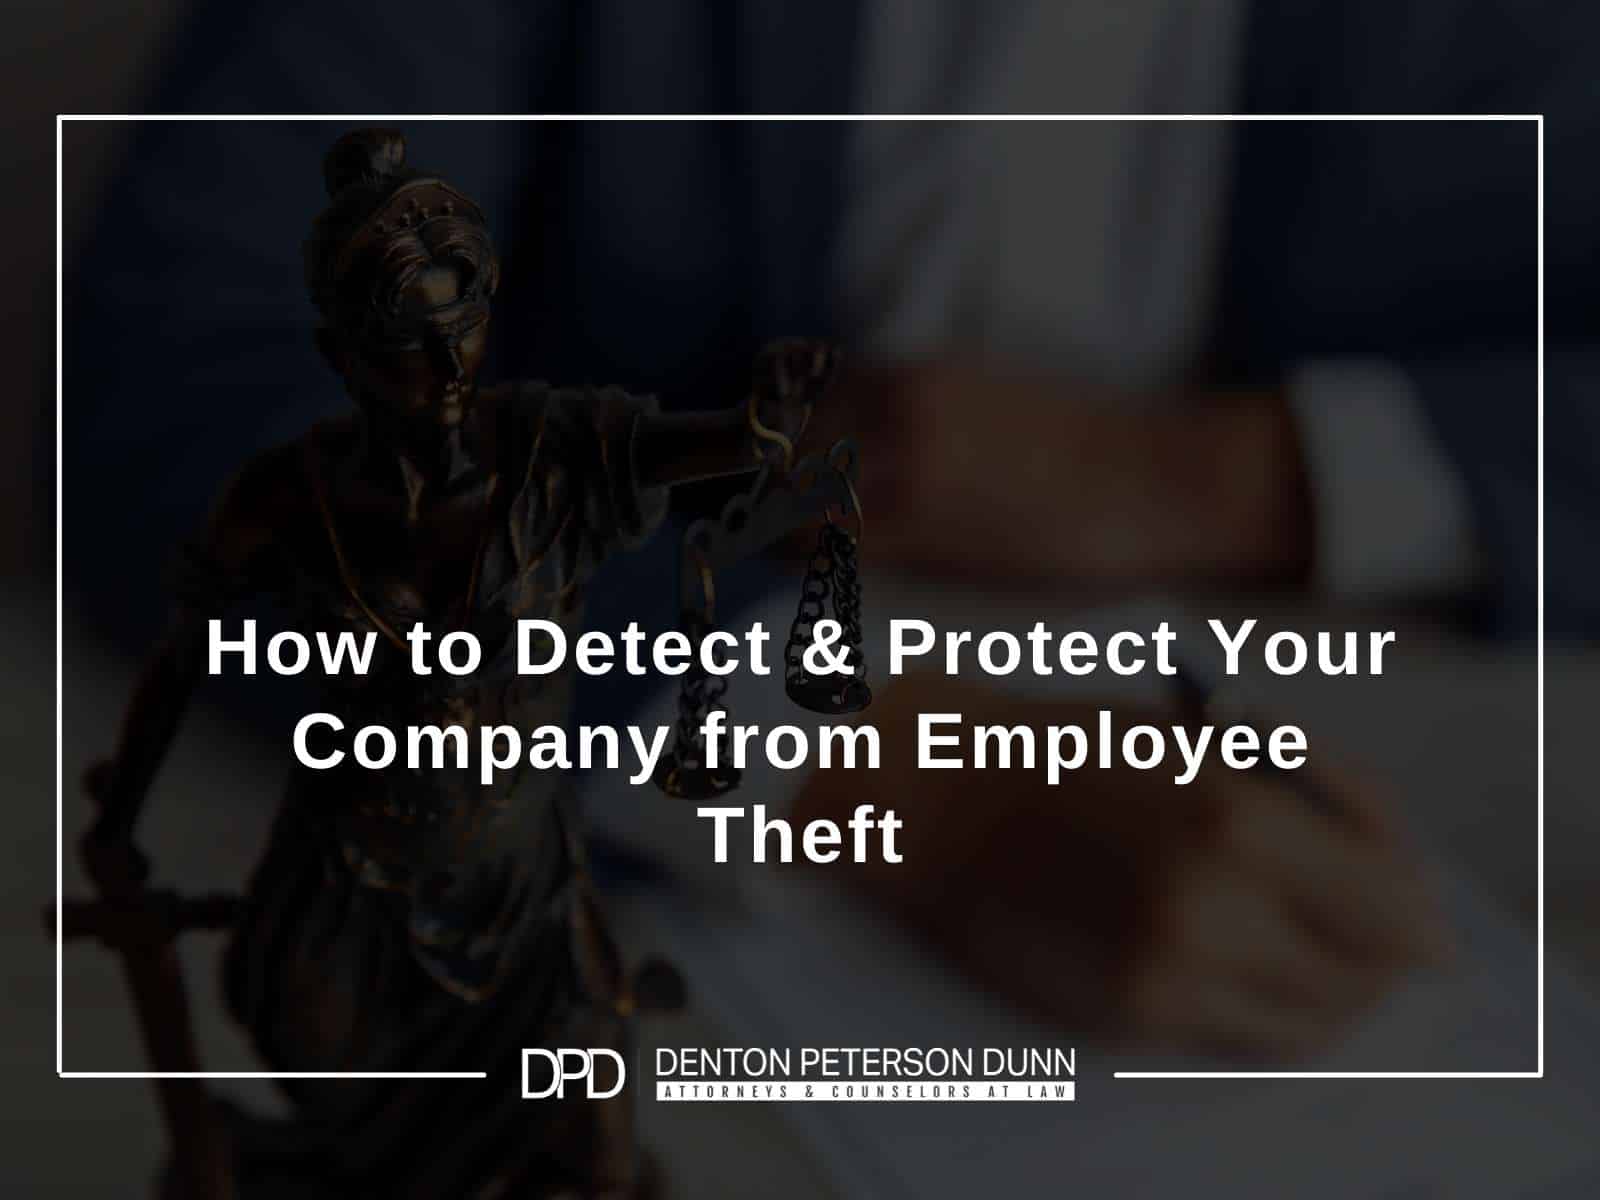 How to Detect & Protect Your Company from Employee Theft